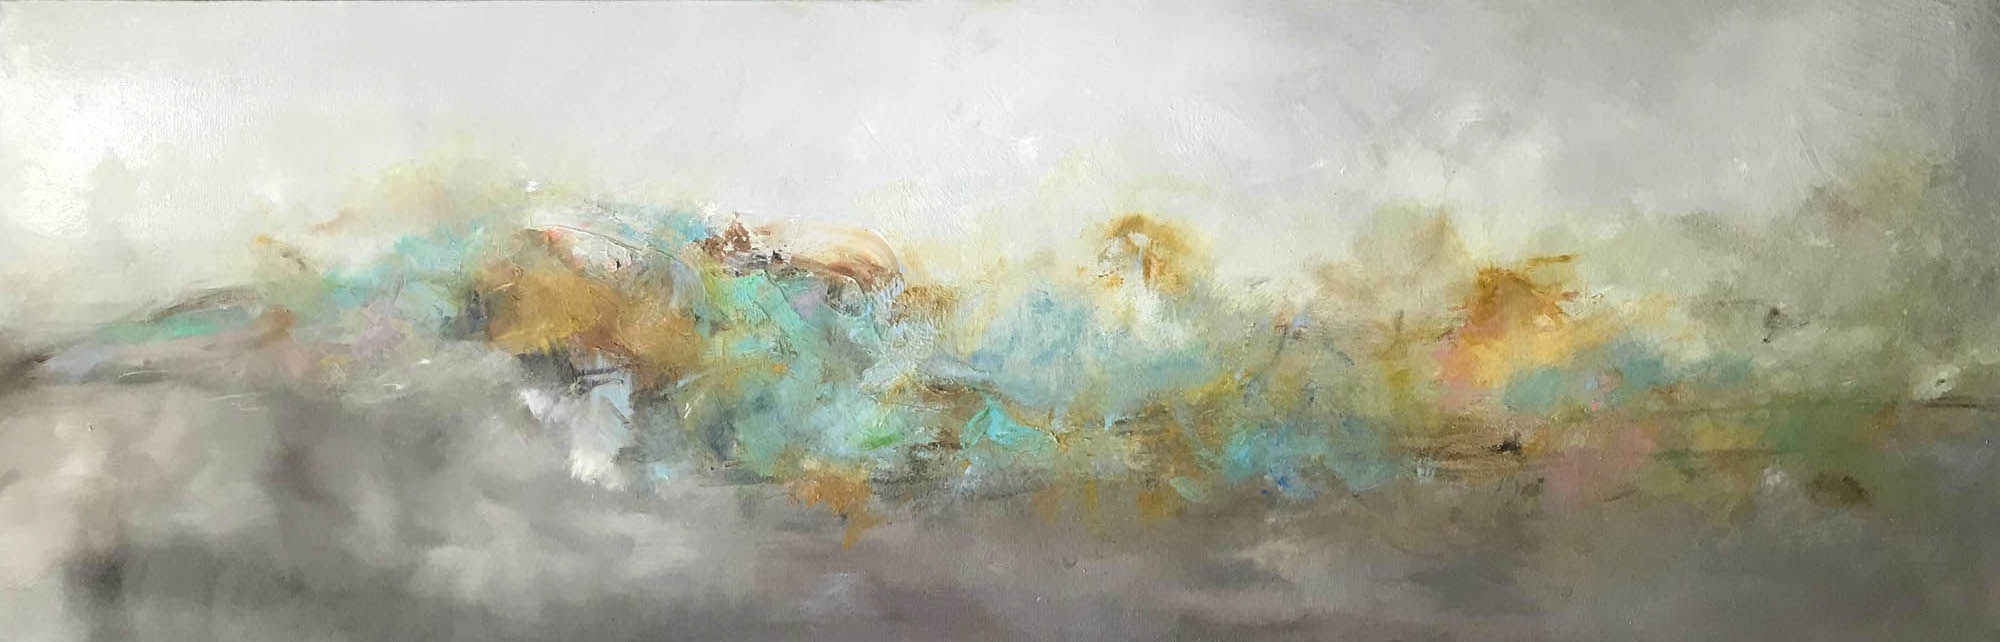 Floating in the Mist Oil Abstract by Red, 20x60